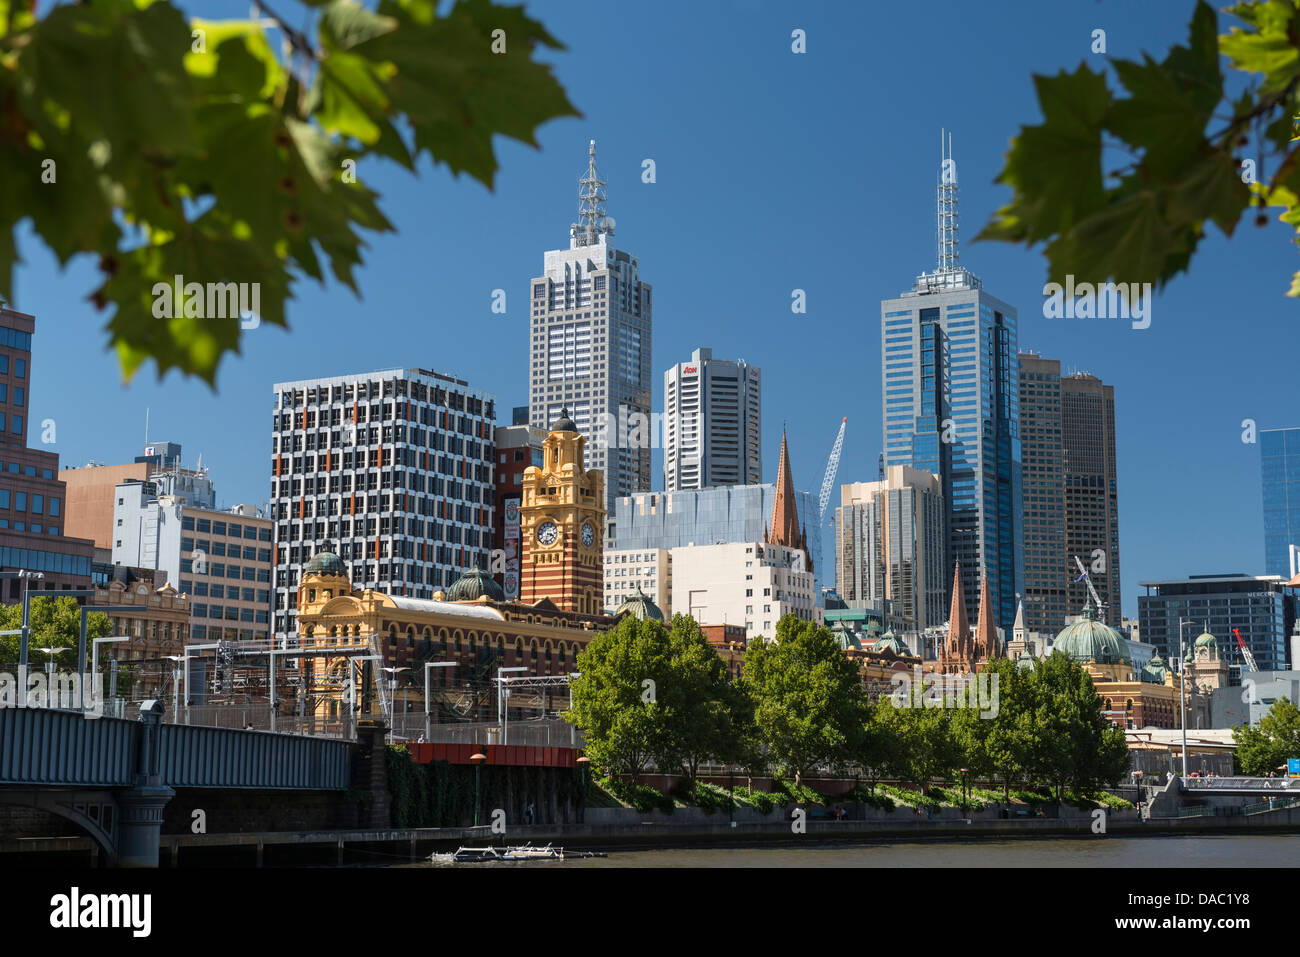 View of Melbourne Skyline across the Yarra River from Southbank Promenade, Australia Stock Photo